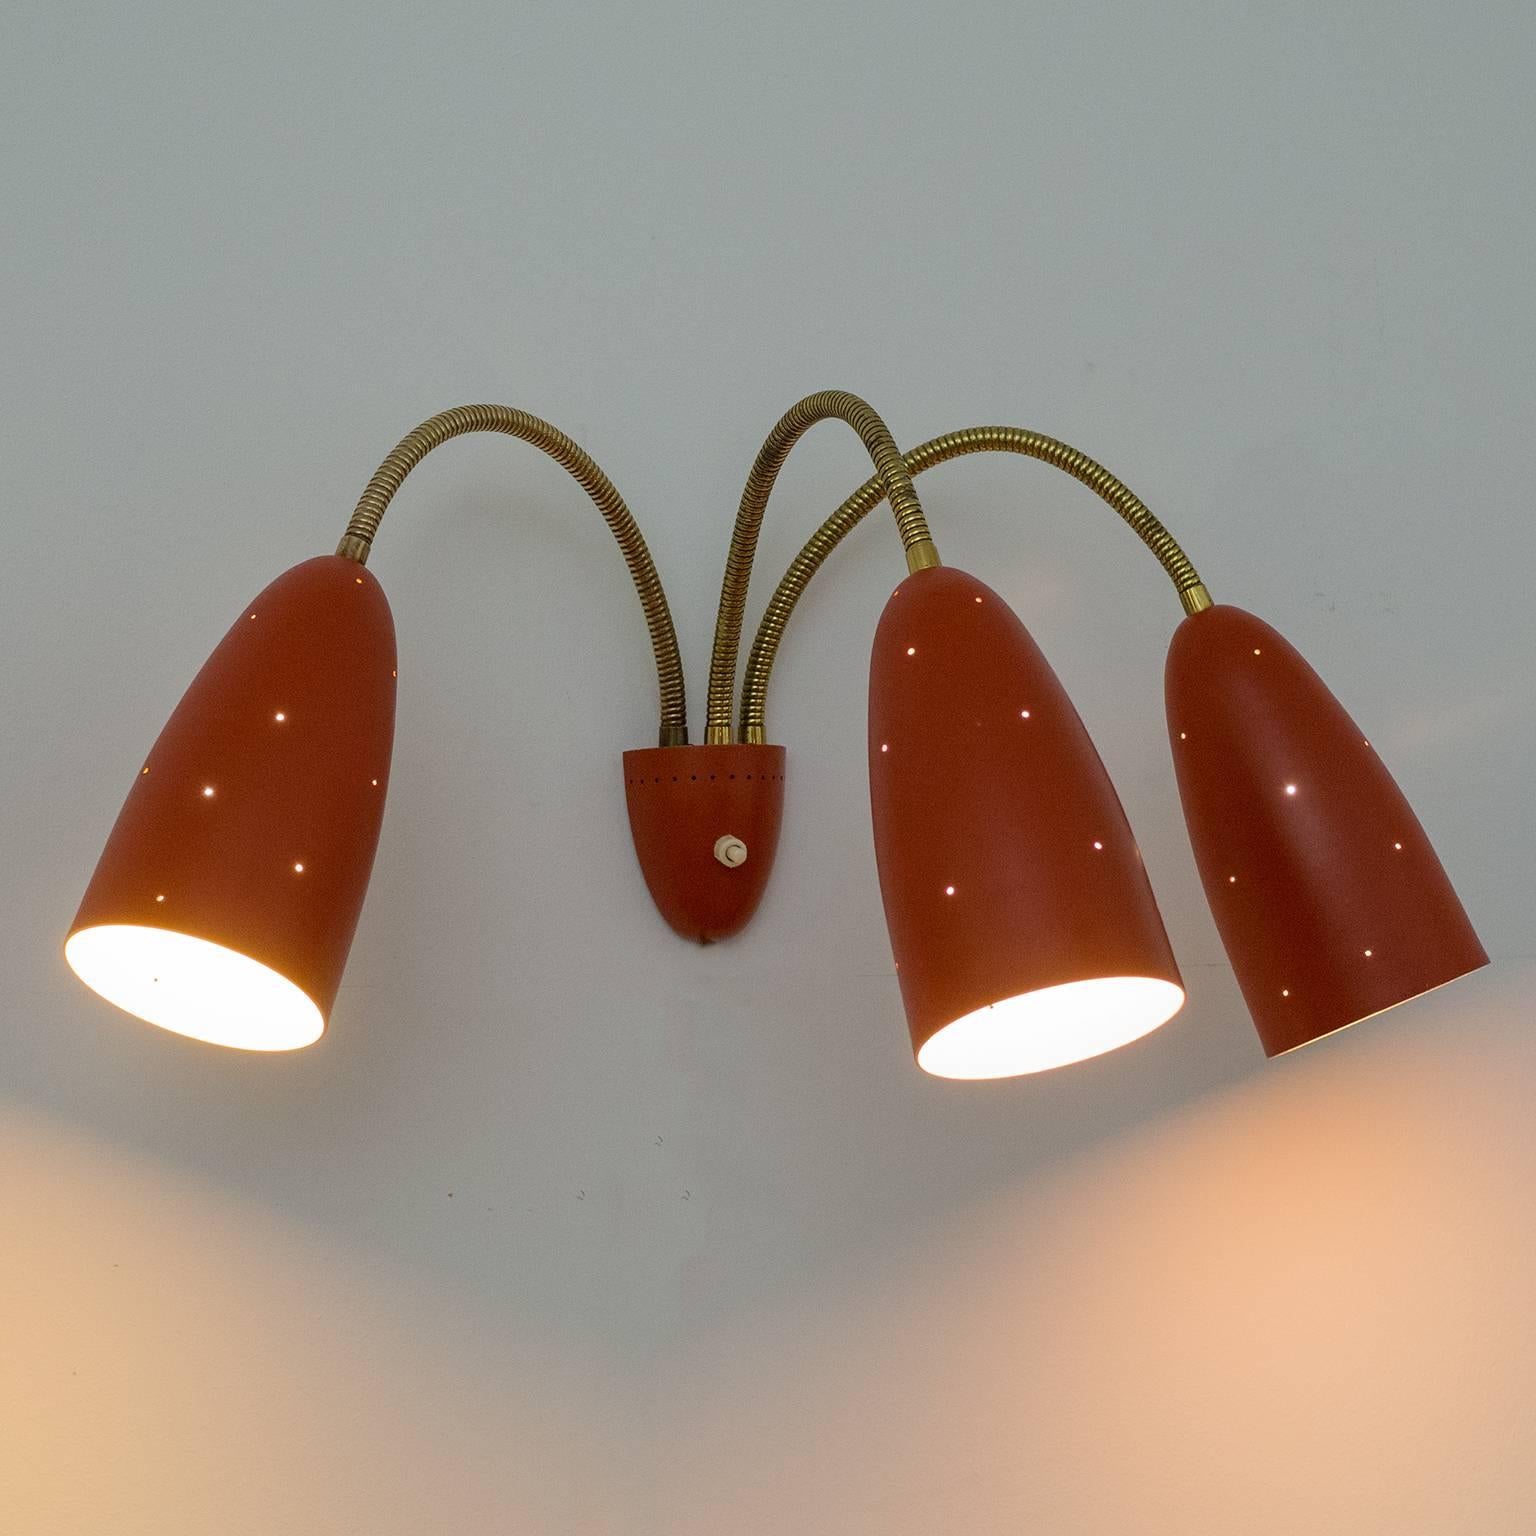 European Large Three-Arm Wall Light with Pierced Red Cones, 1950s